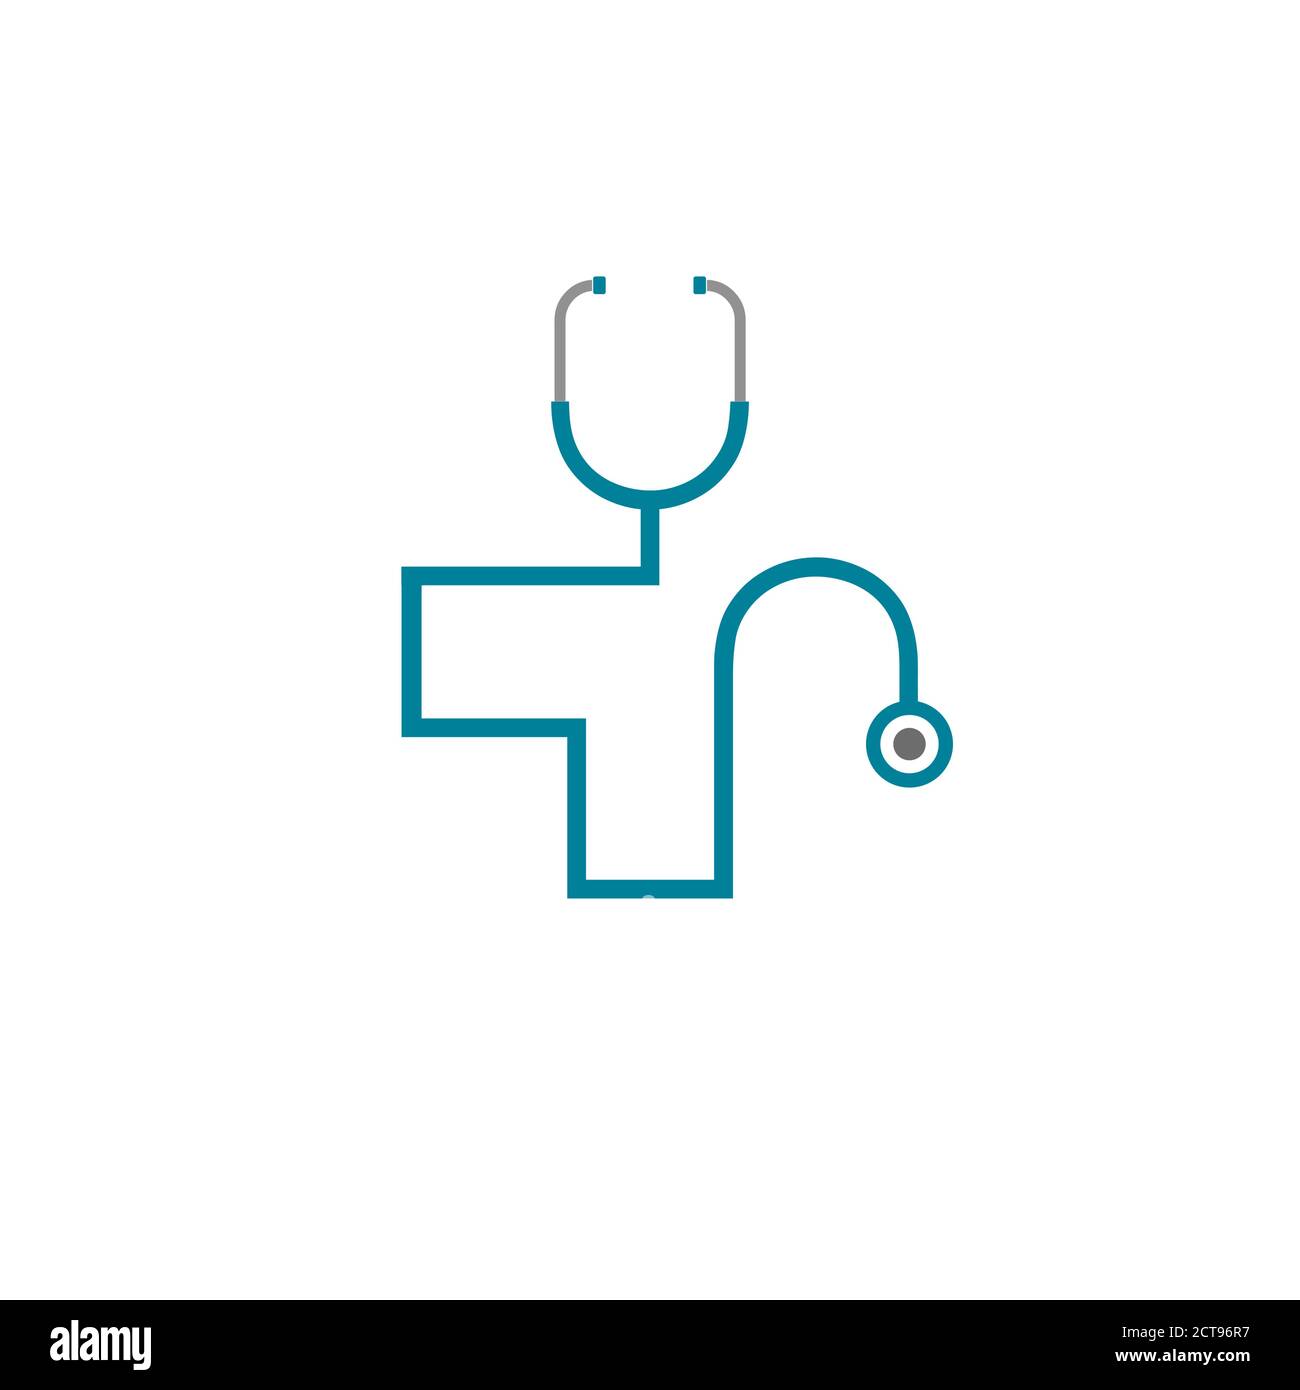 Doctor plus illustration vector logo design for medical and health care symbols. Stock Vector